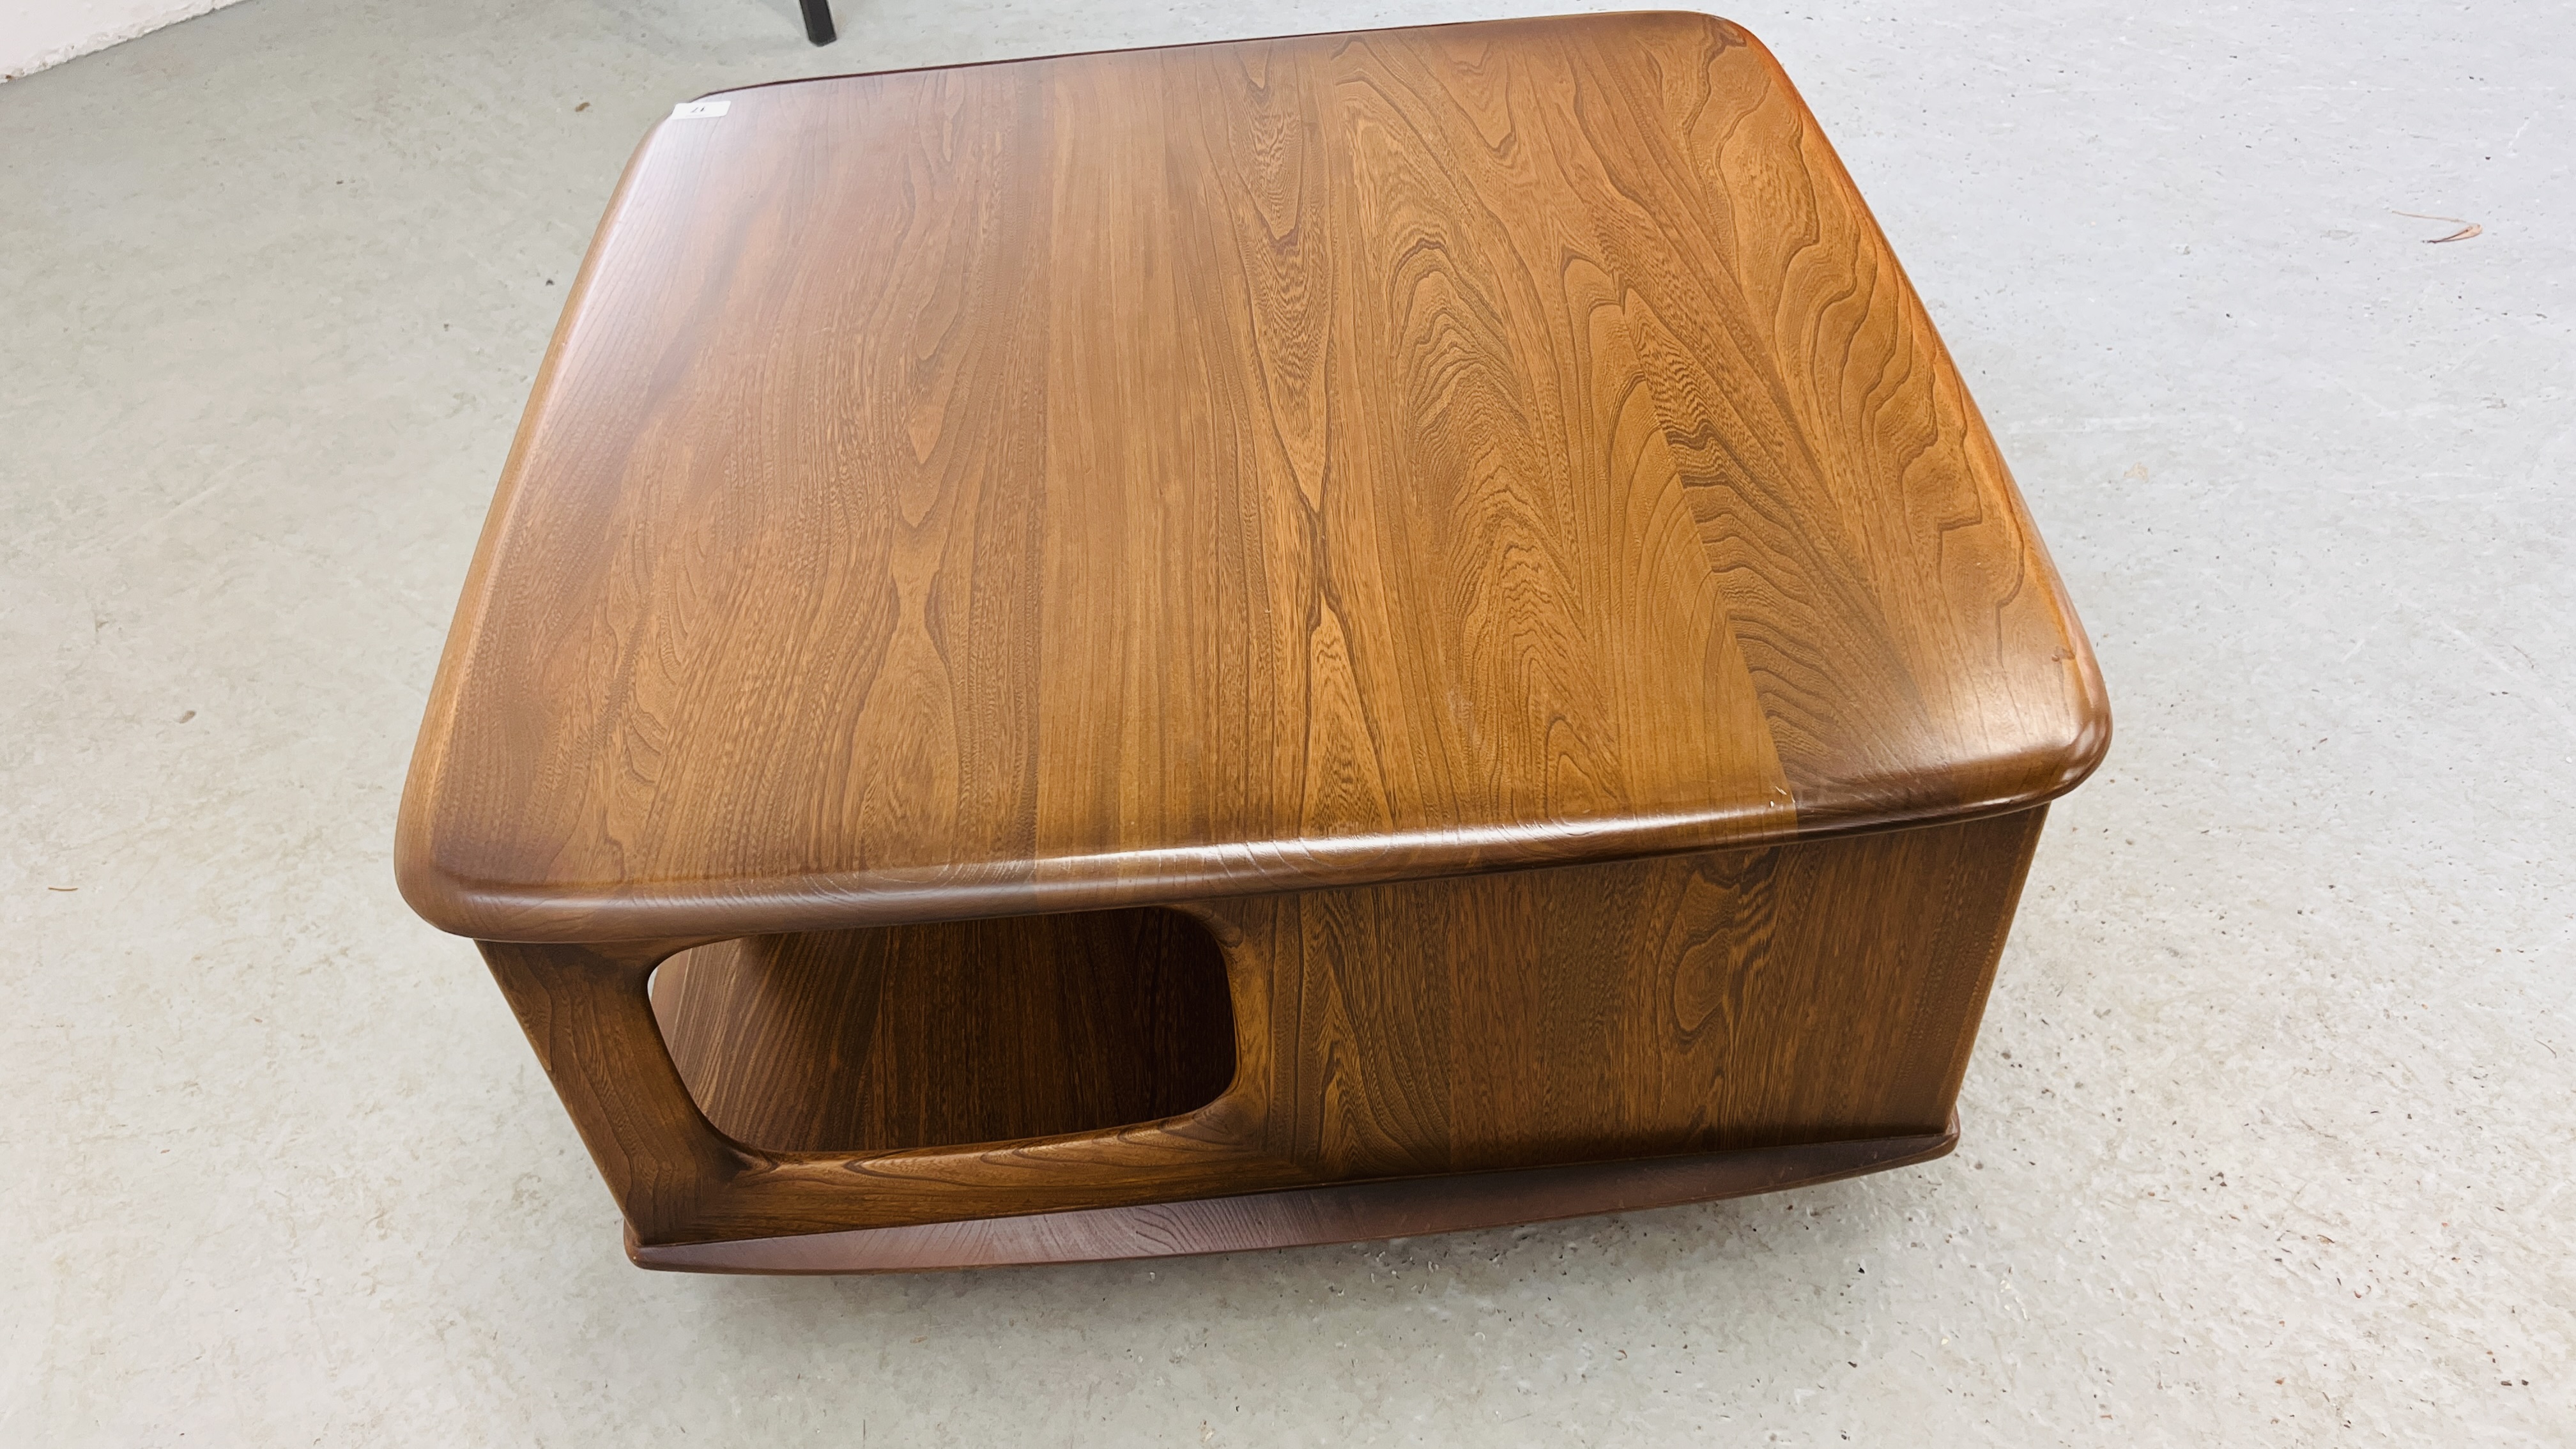 MID CENTURY ERCOL GOLDEN DAWN PANDORAS BOX COFFEE TABLE WITH TWO DRAWERS W 80CM, D 80CM, H 40CM. - Image 7 of 10